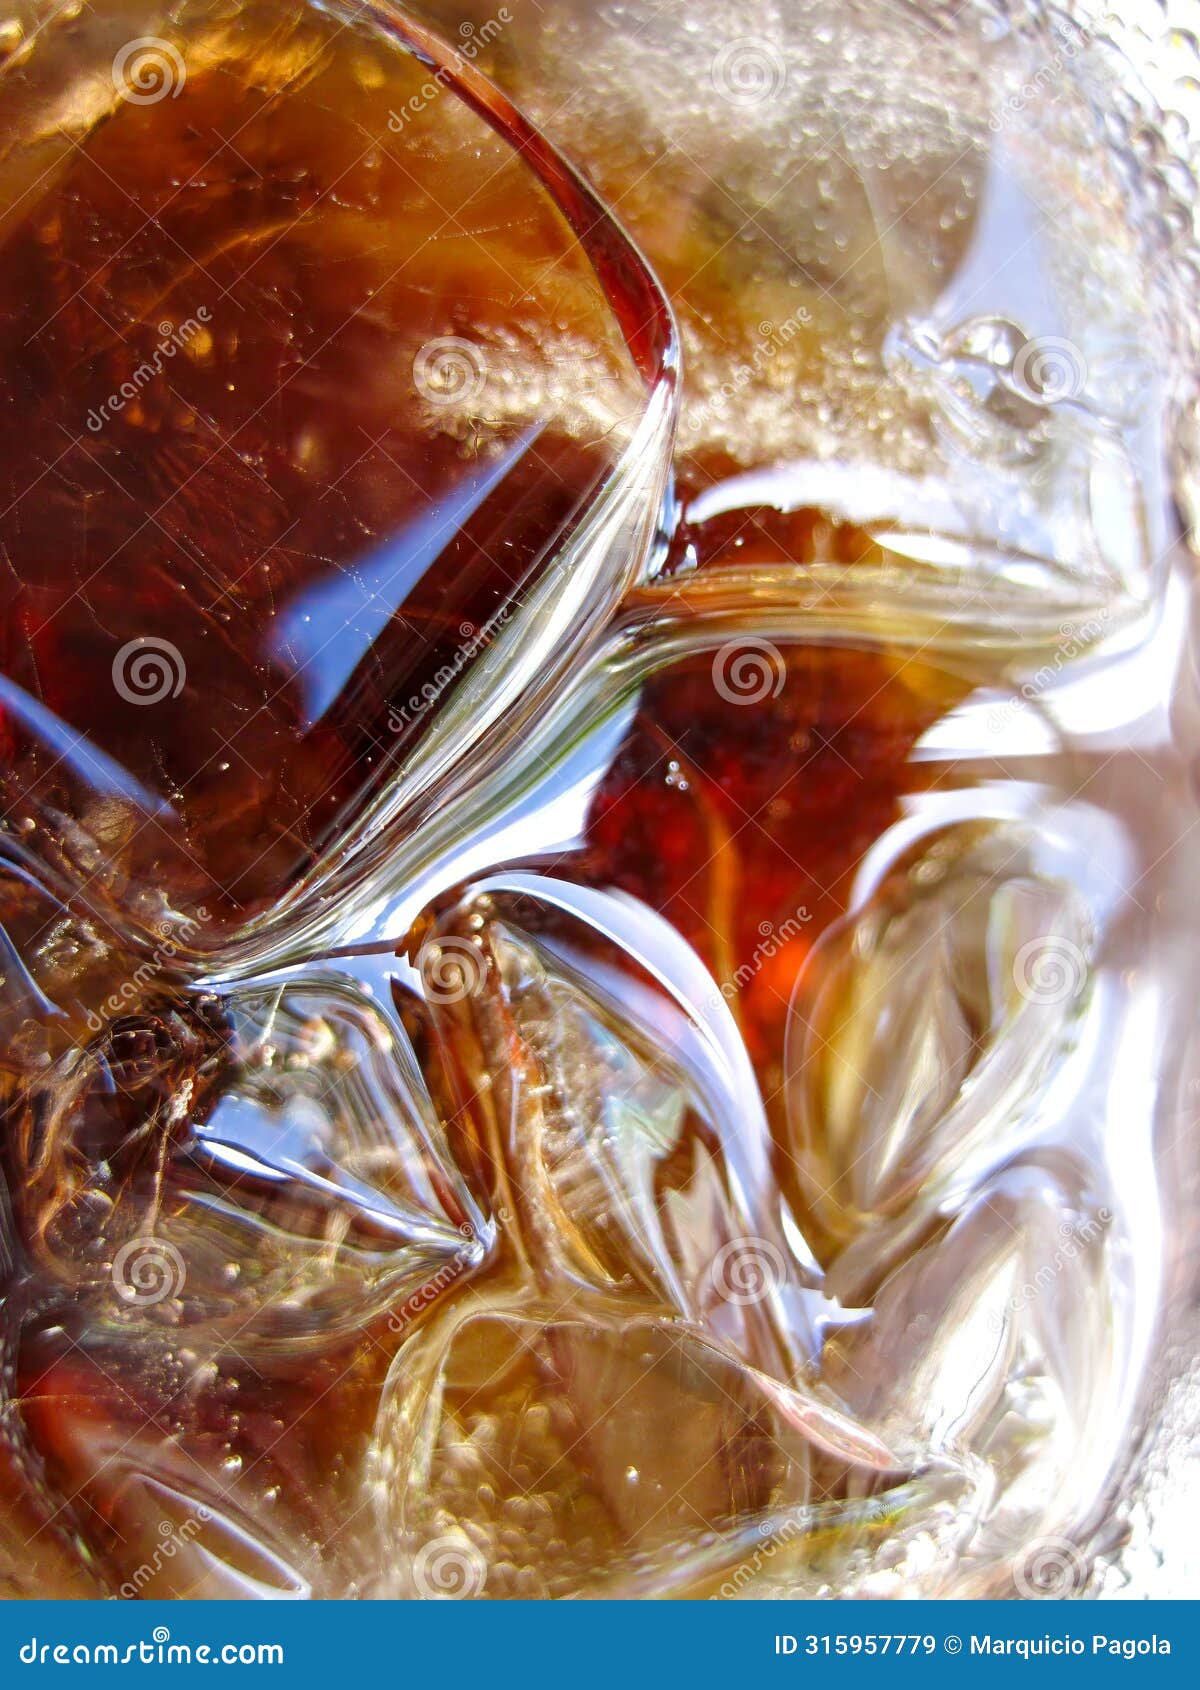 a glass of soda with ice cubes in it